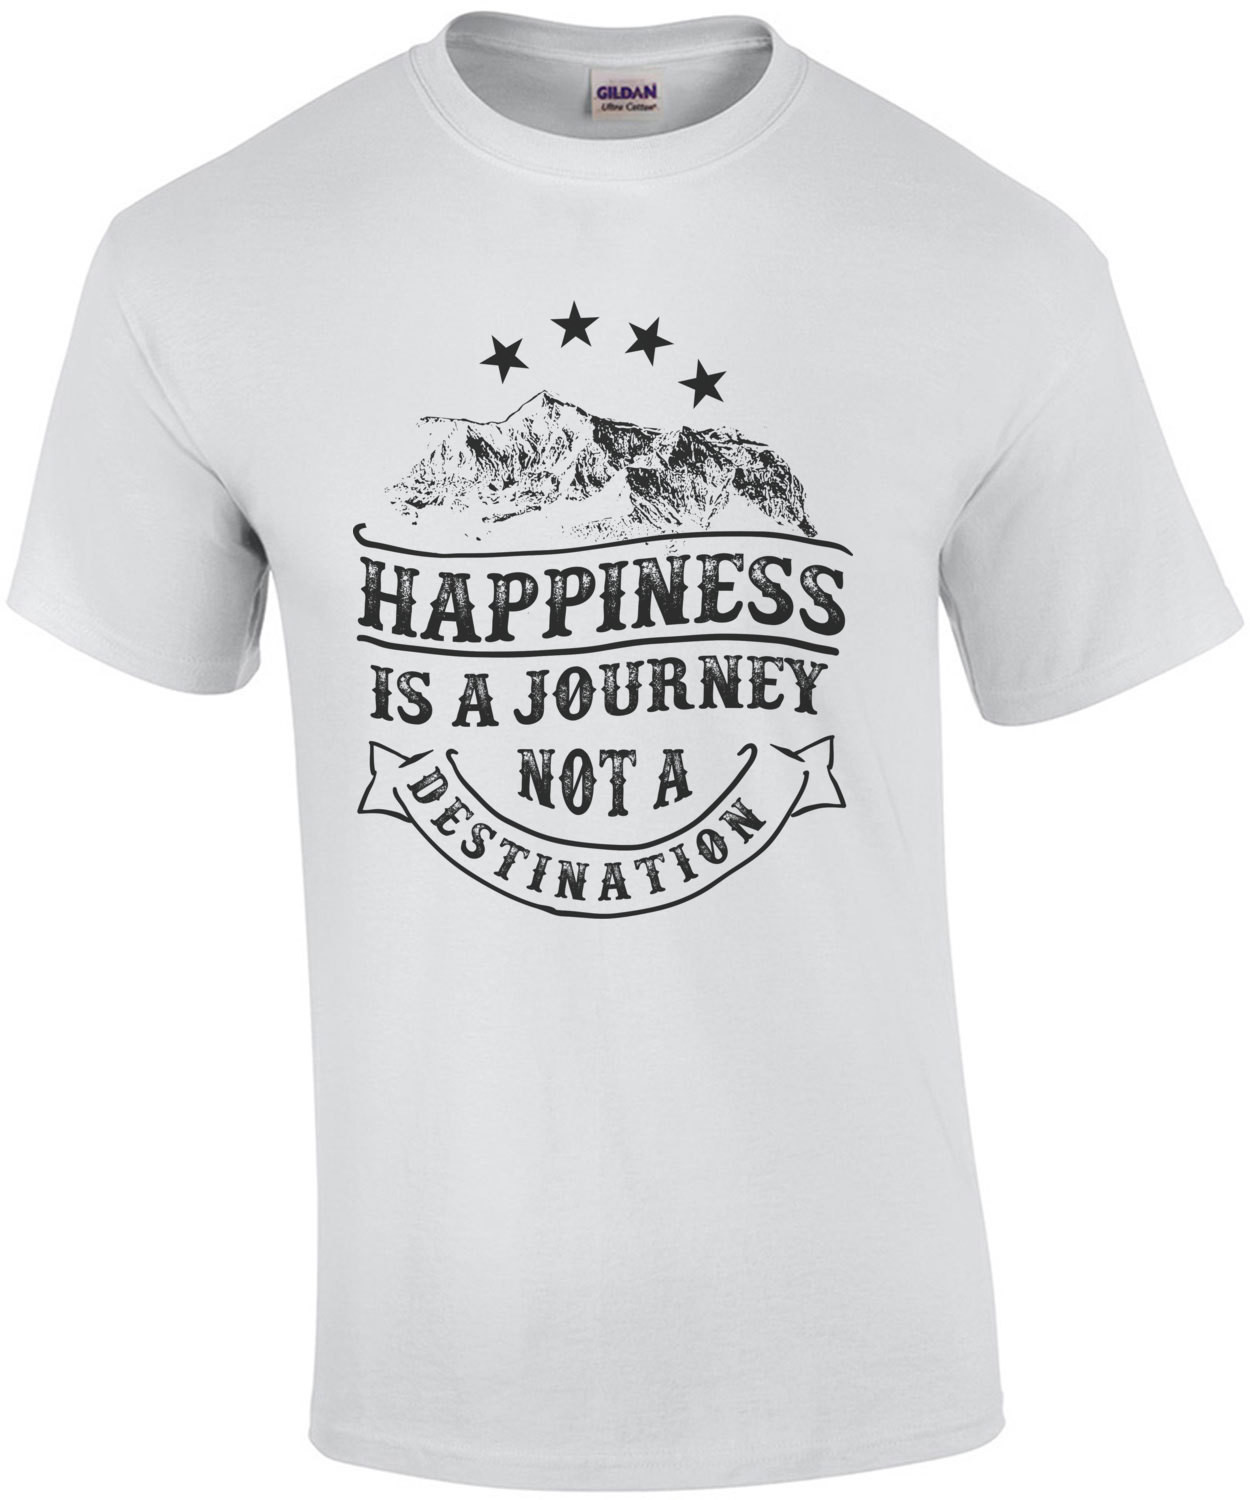 Happiness Is A Journey Not A Destination T-Shirt